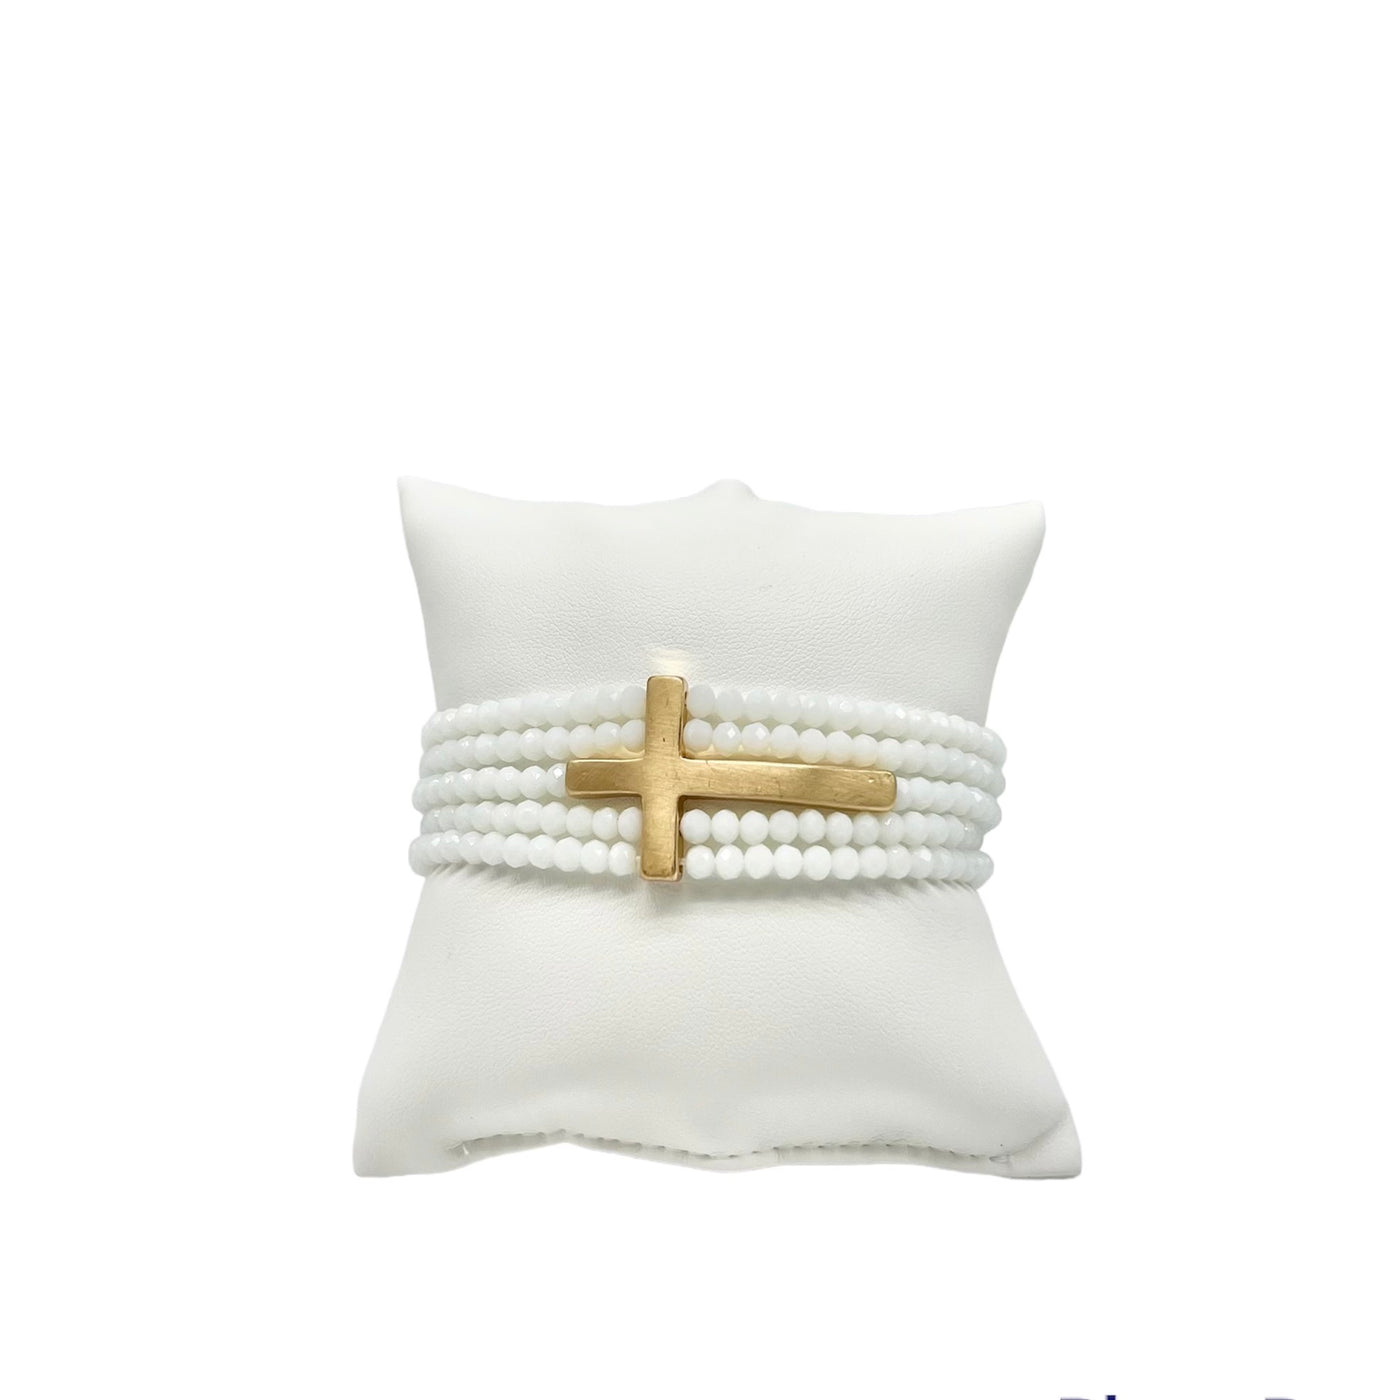 White Crystal with Gold Cross 5 Layer Stretch Bracelet